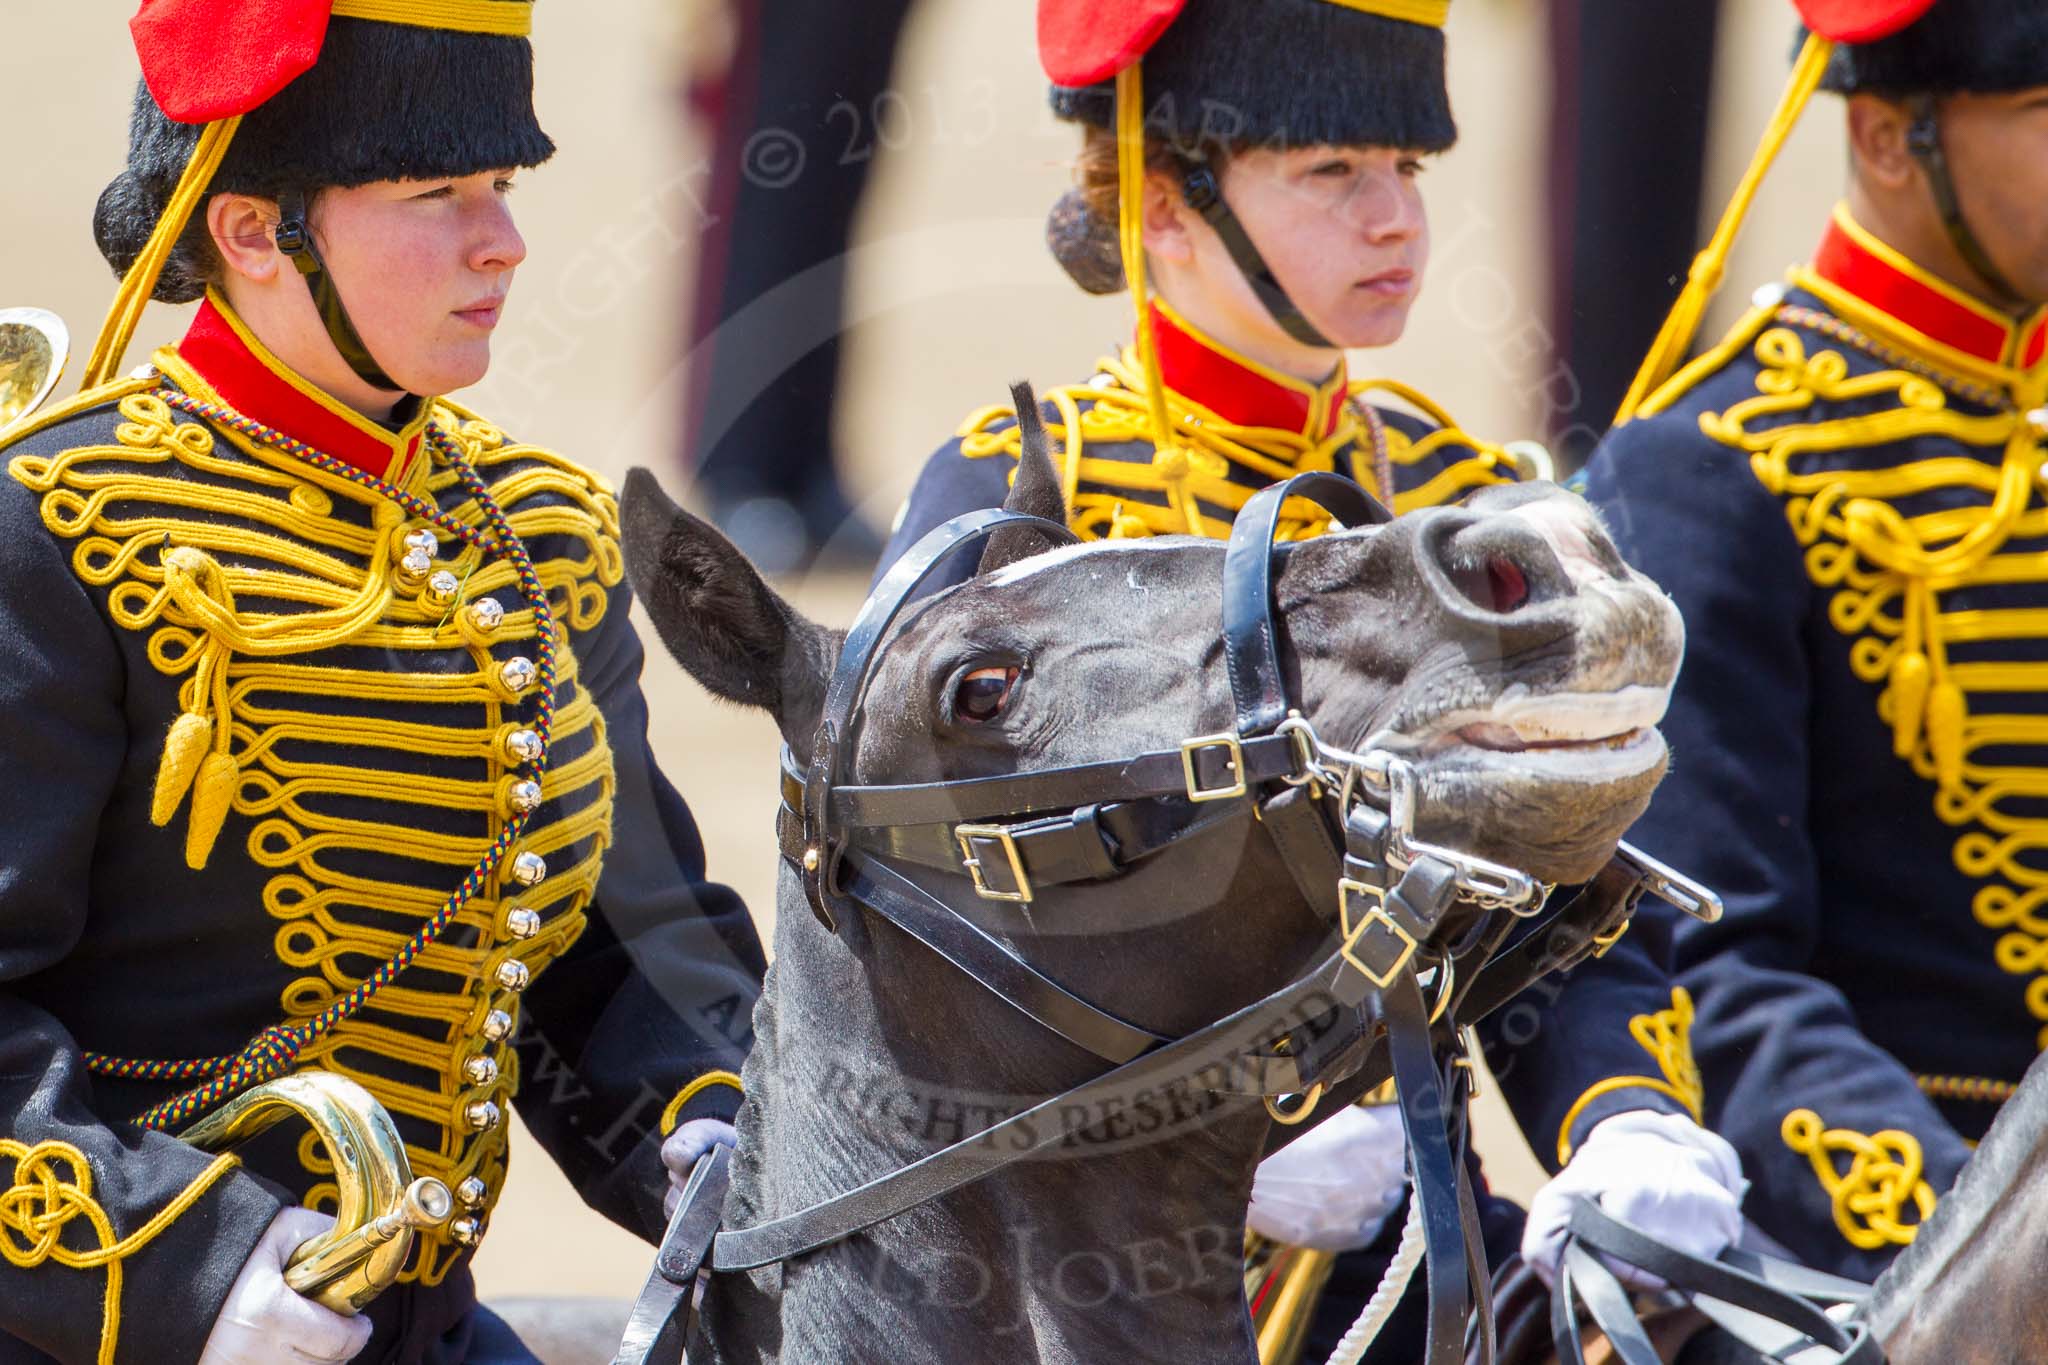 The Colonel's Review 2013: The Ride Past - the King's Troop Royal Horse Artillery..
Horse Guards Parade, Westminster,
London SW1,

United Kingdom,
on 08 June 2013 at 11:52, image #733